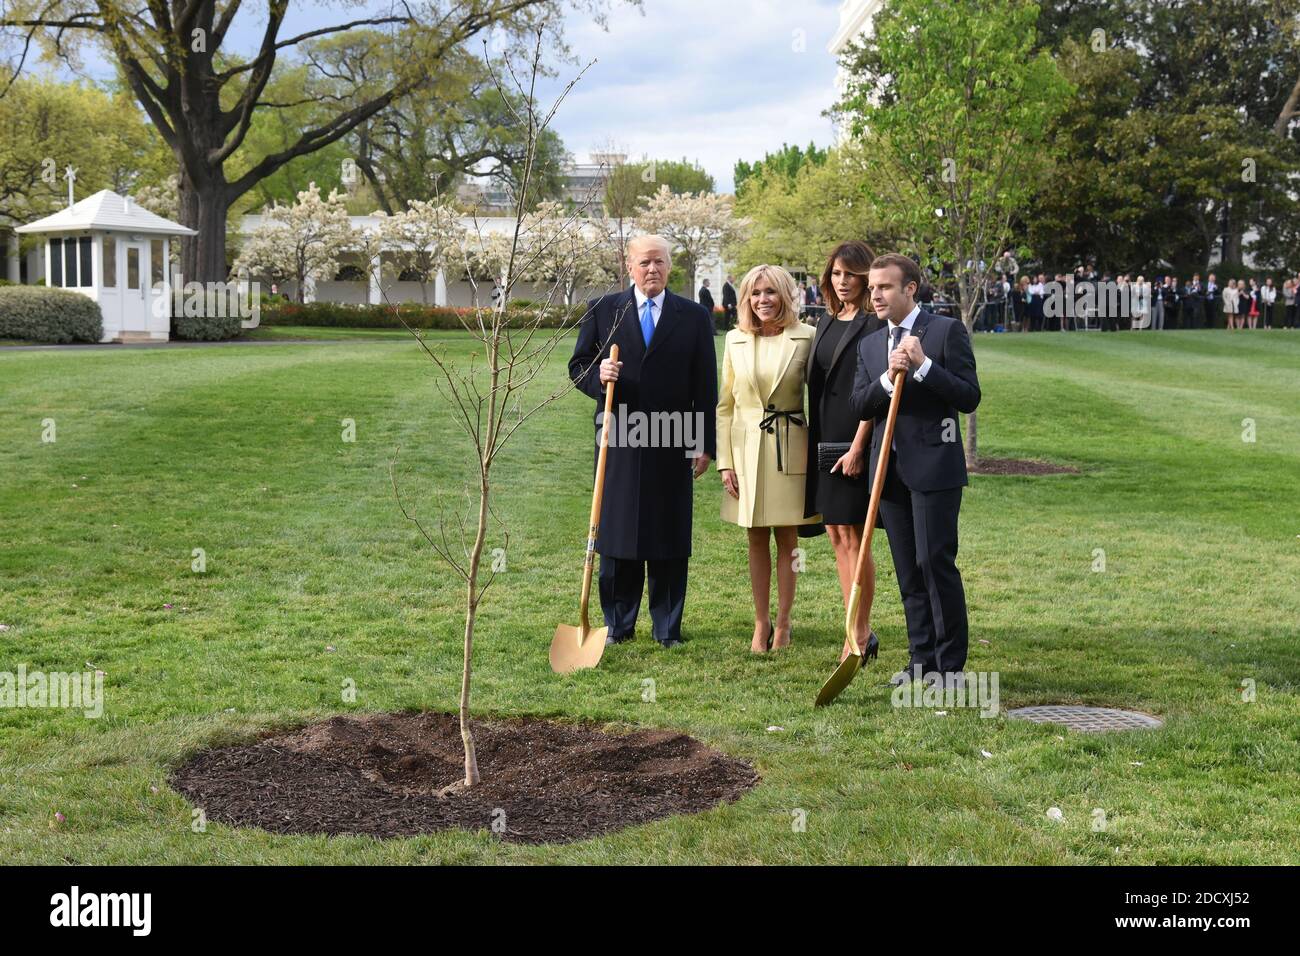 U.S President Donald Trump and First Lady Melania Trump join French President Emmanuel Macron and his wife Brigitte Macron to plant on the South Lawn of the White House a tree that the Macrons provided as a gift, a European Sessile Oak April 23, 2018 in Washington D.C . Photo by Olivier Douliery/ABACAPPRESS.COM Stock Photo